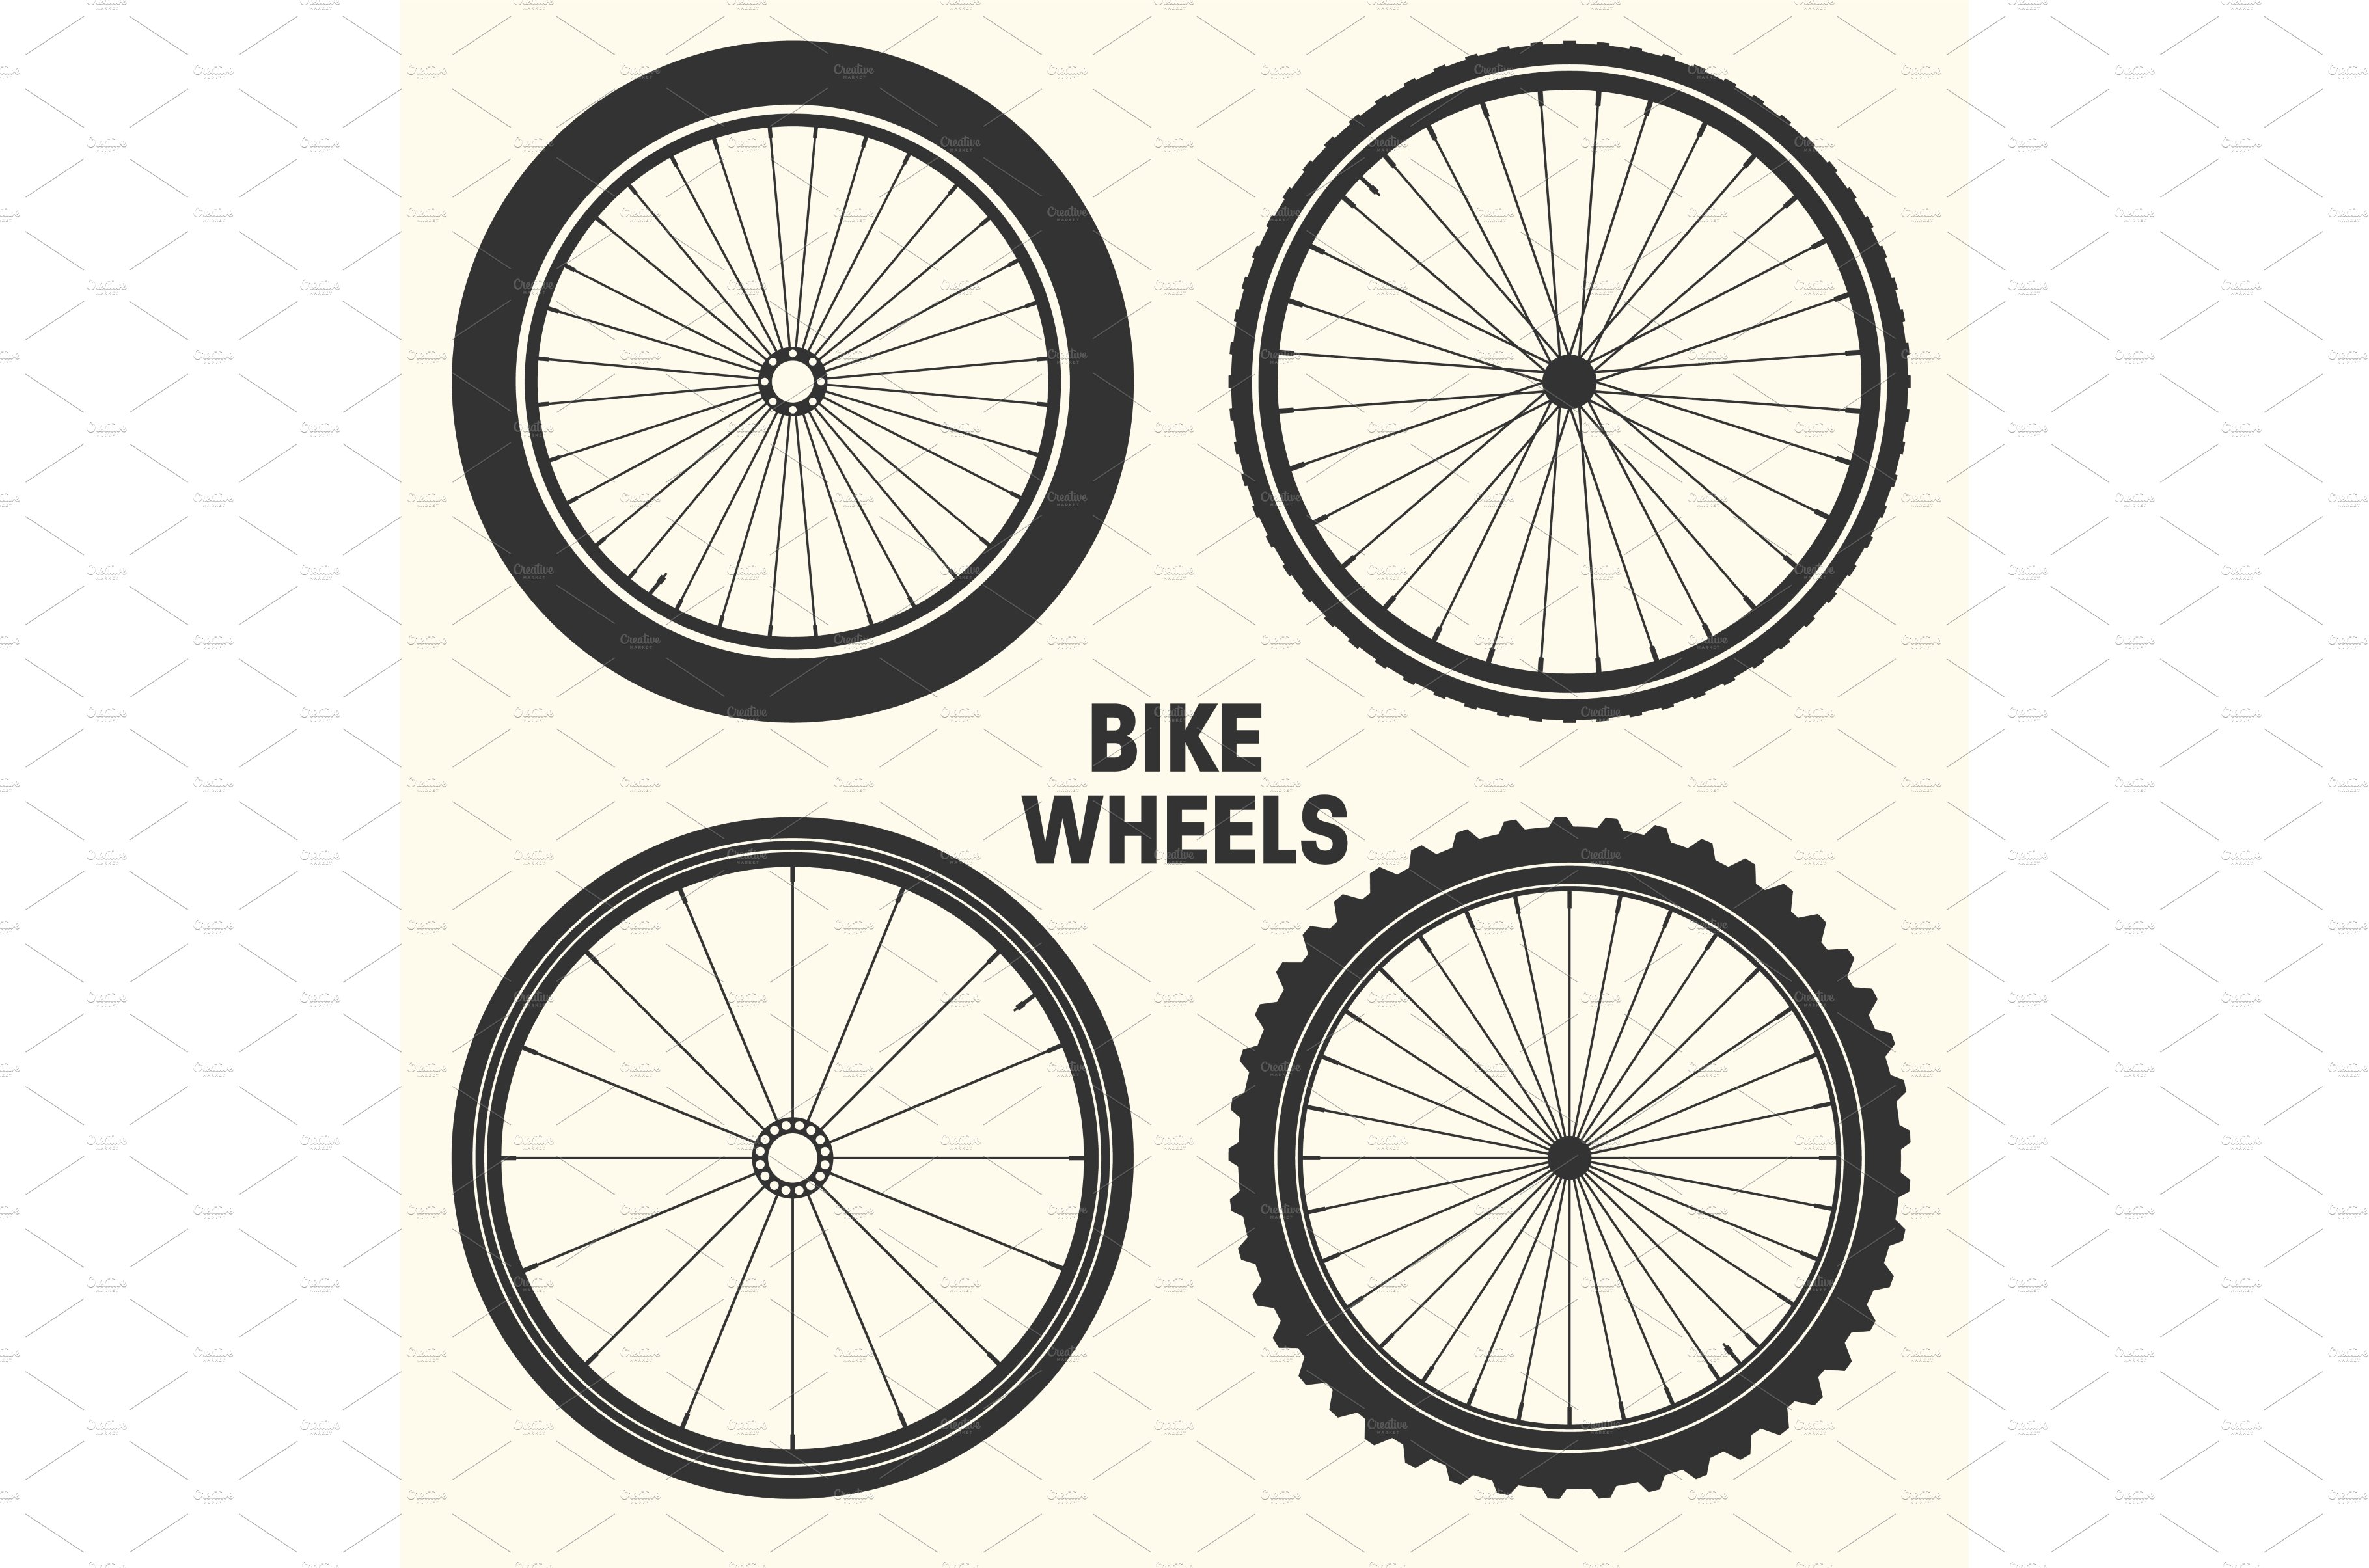 Bicycle wheel symbol vector cover image.